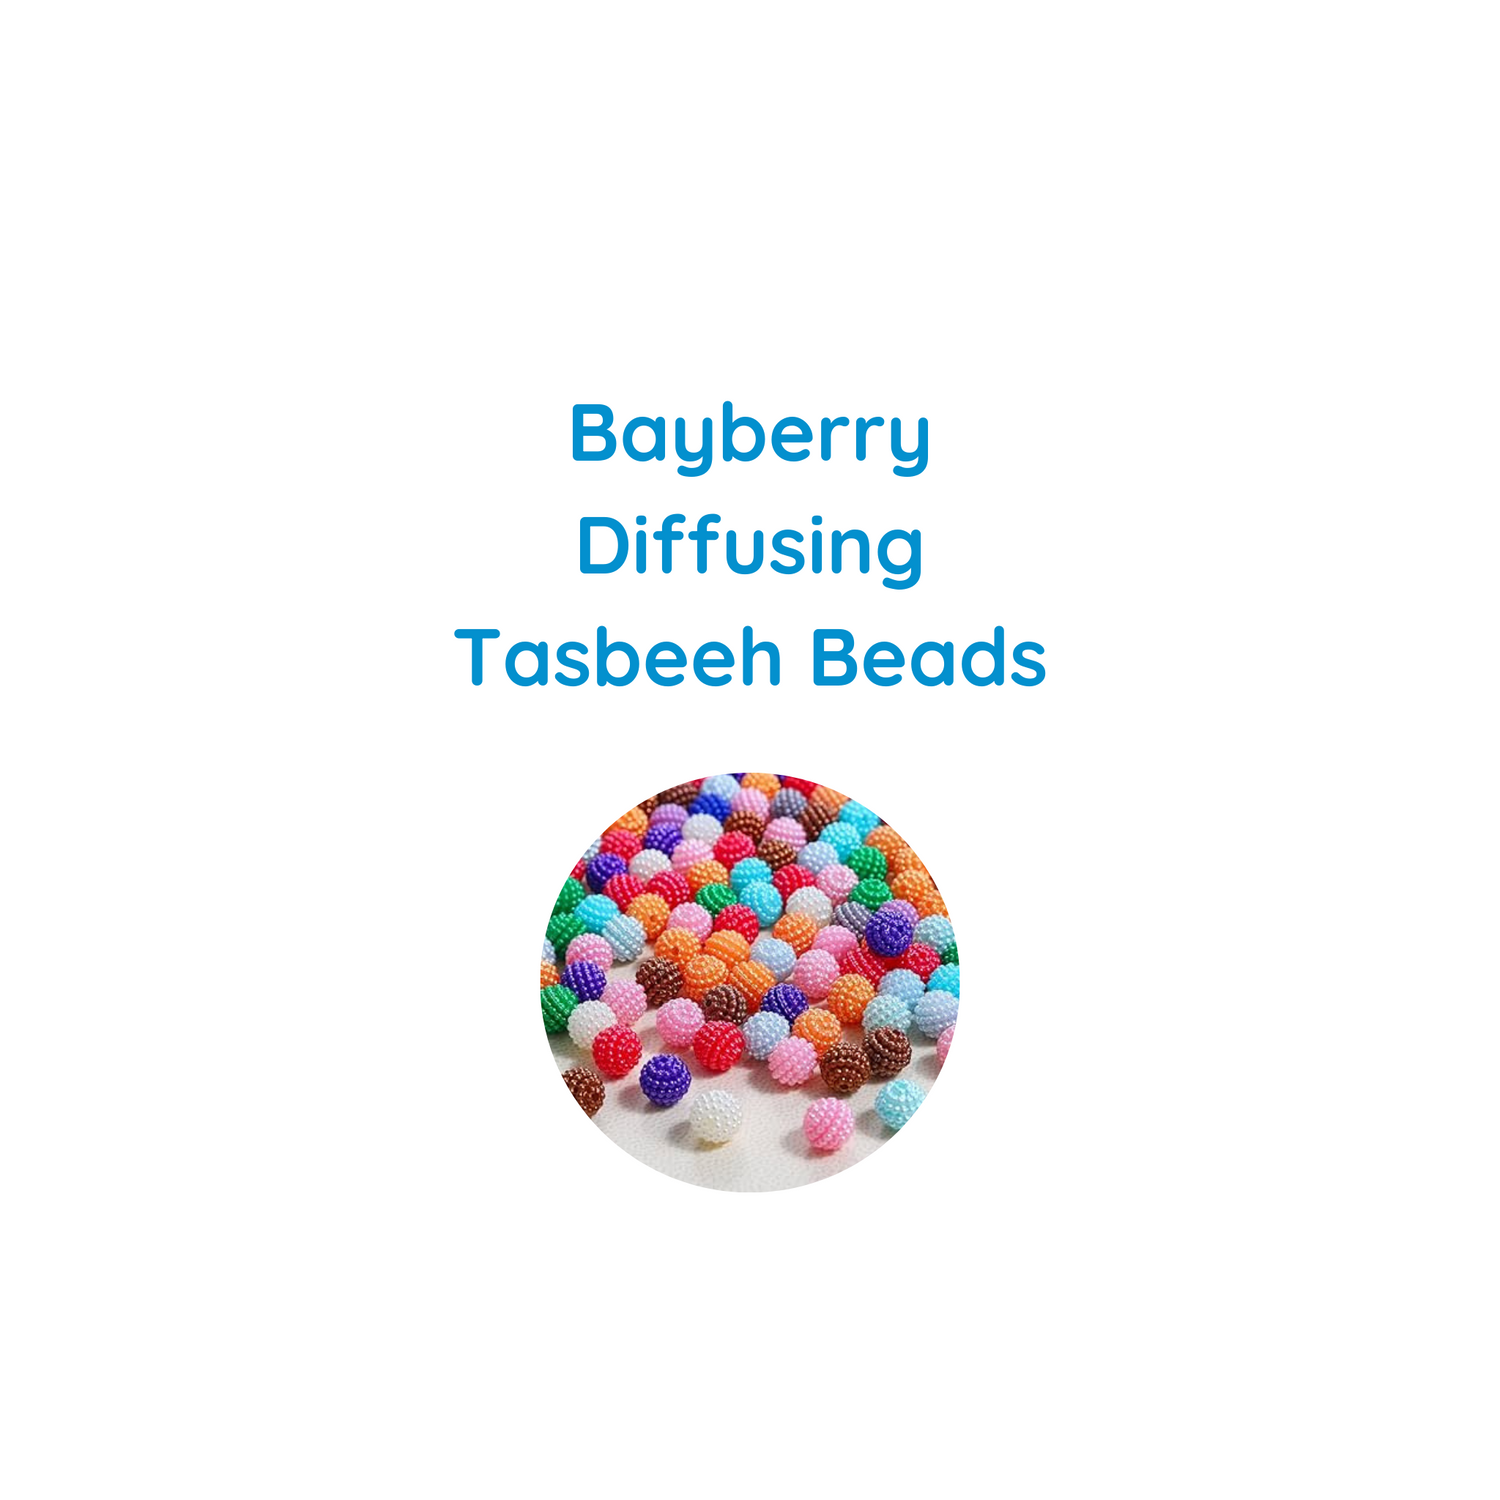 Bayberry Diffusing Tasbeeh Beads (Coming Soon)